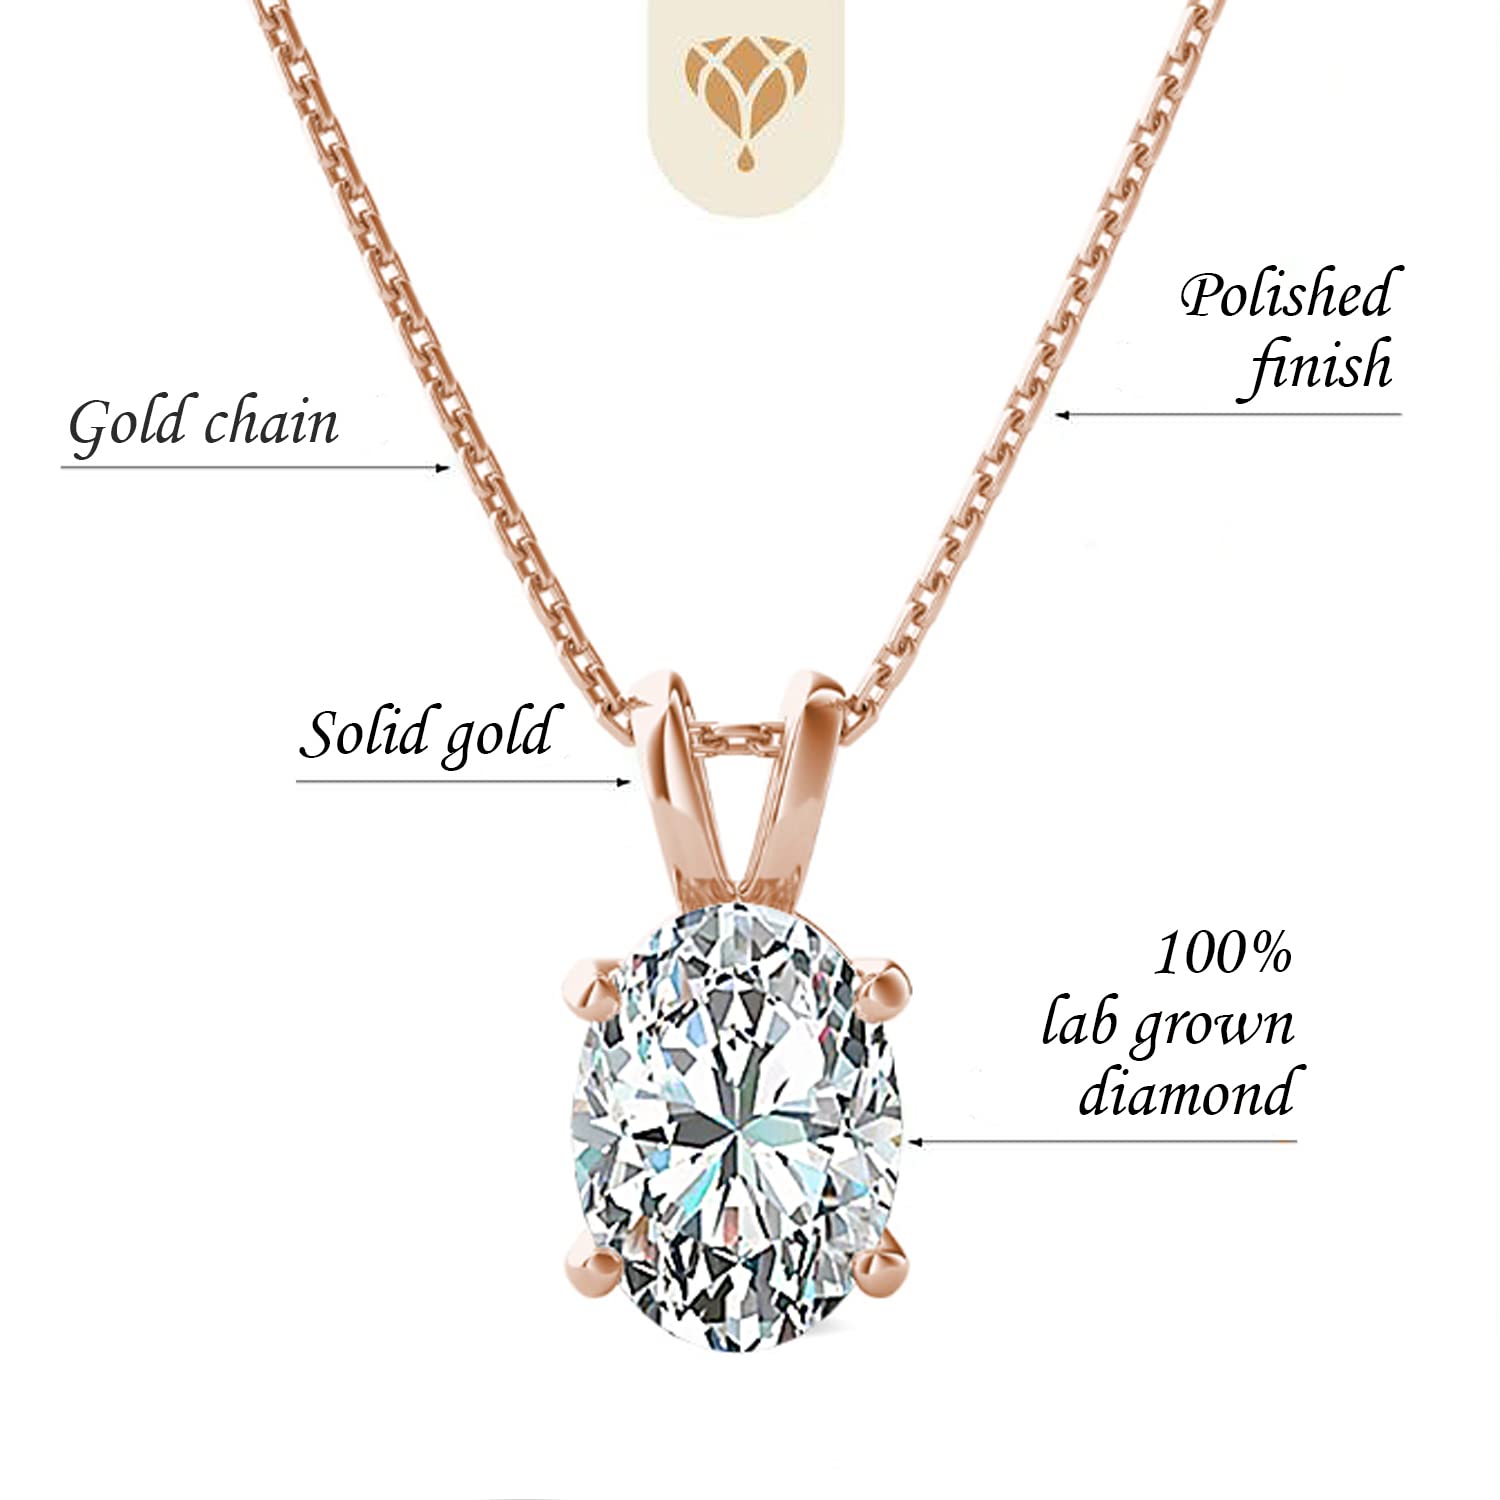 The Diamond Deal .25-1.00 Carat Oval Shape Brilliant Solitaire Lab-Grown Diamond Solitaire Pendant Necklace For Women Girls infants | 14k Yellow or White or Rose/Pink Gold With 18